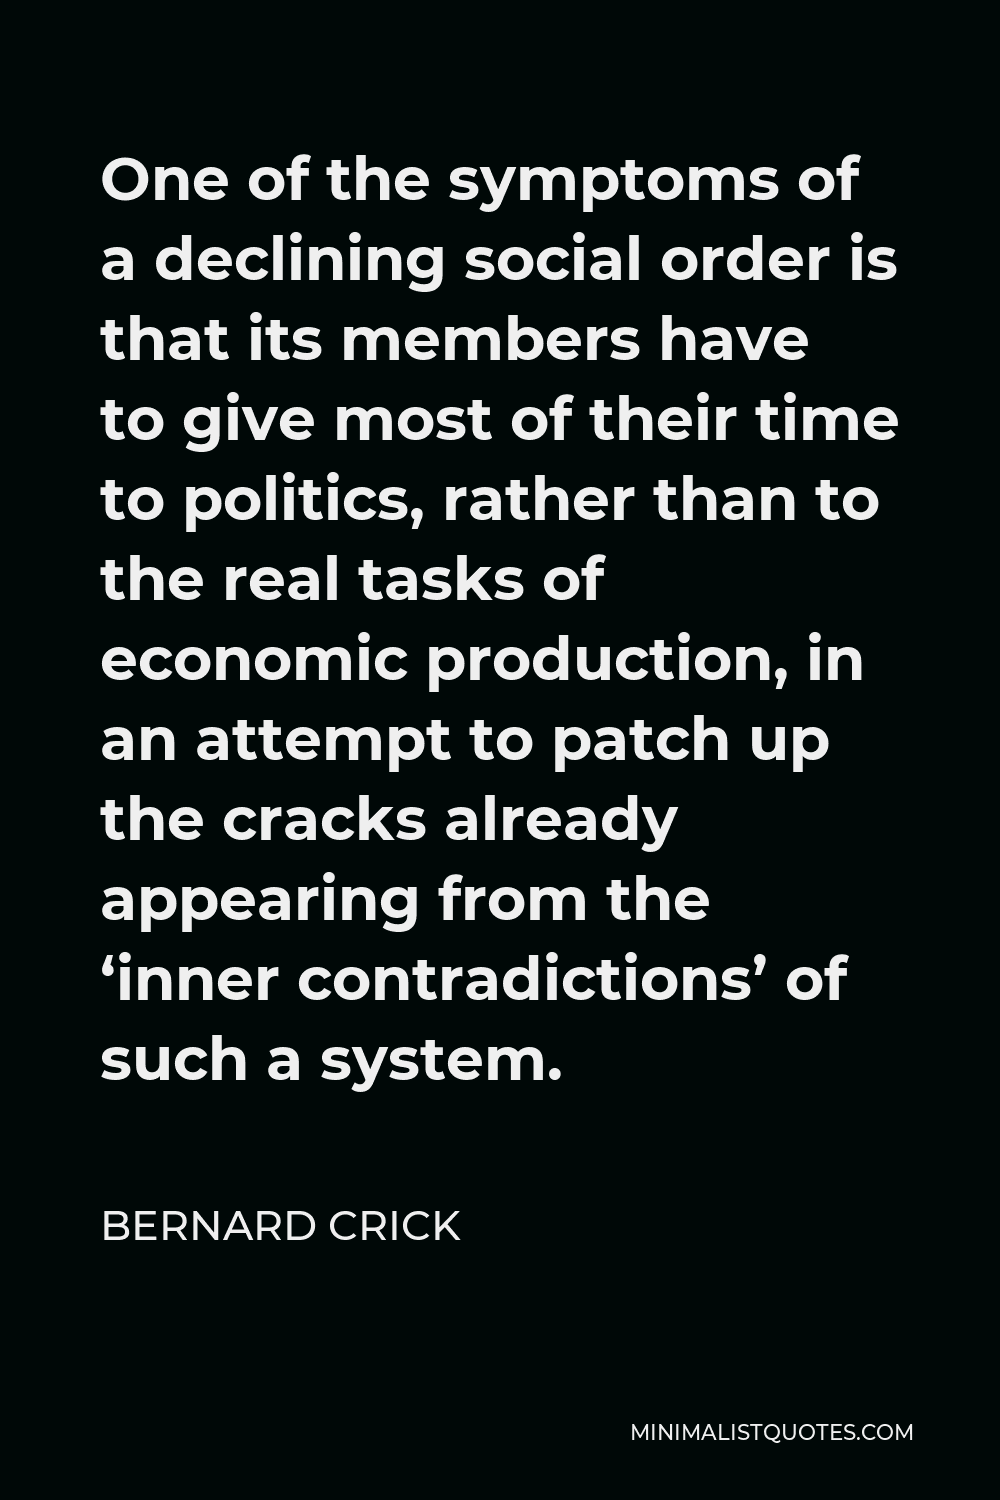 Bernard Crick Quote - One of the symptoms of a declining social order is that its members have to give most of their time to politics, rather than to the real tasks of economic production, in an attempt to patch up the cracks already appearing from the ‘inner contradictions’ of such a system.